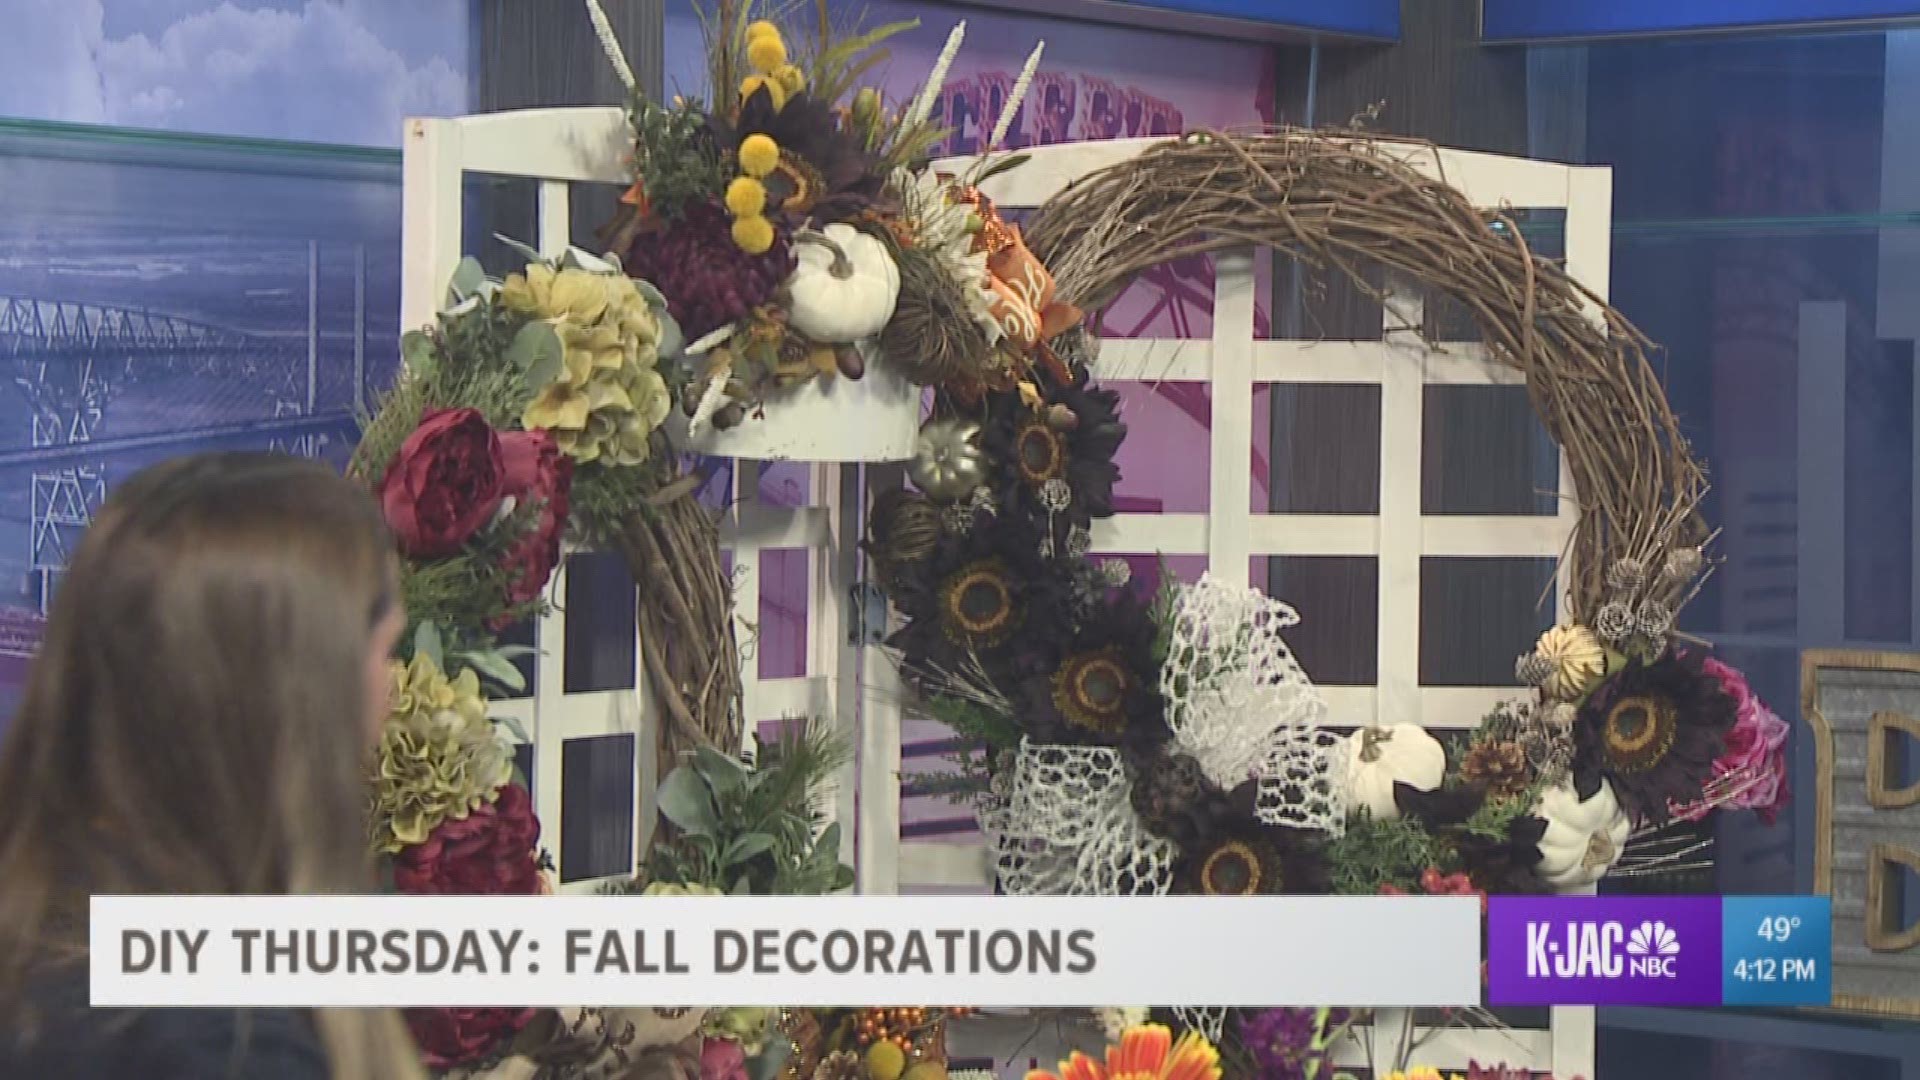 If you're looking for some great fall decor for your home visit www.bysparkleandco.com.